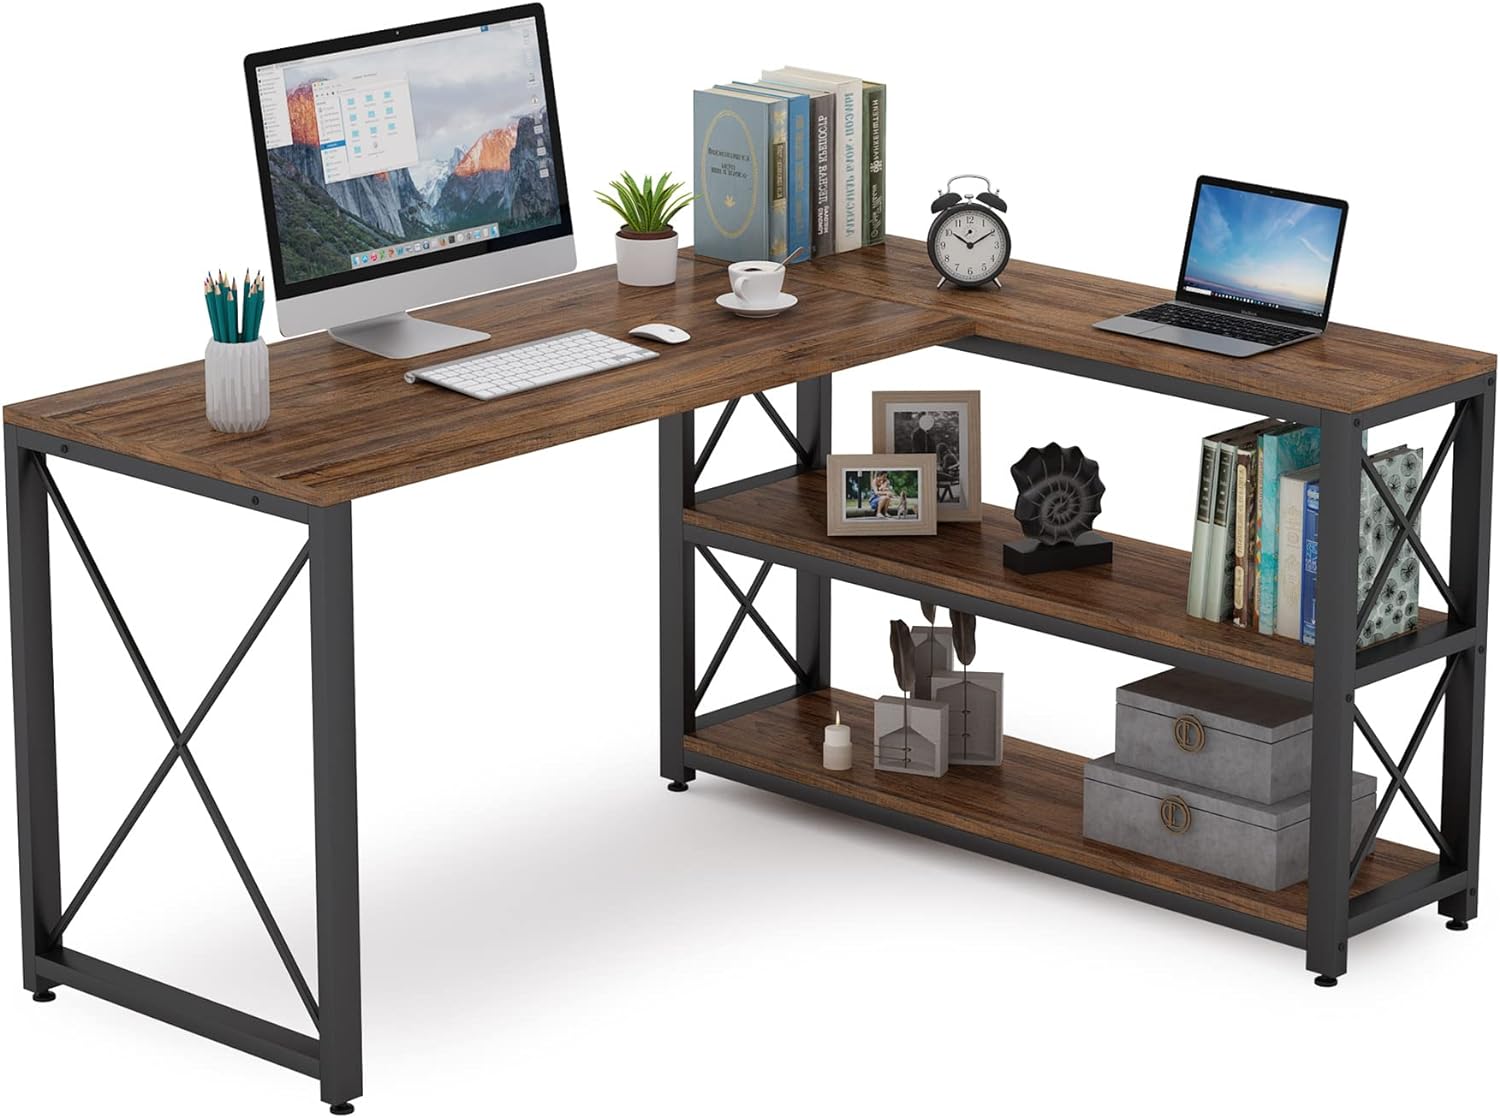 Tribesigns Reversible Industrial L-Shaped Desk with Storage Shelves, Corner Computer Desk PC Laptop Study Table Workstation for Home Office Small Space (Brown, 53)